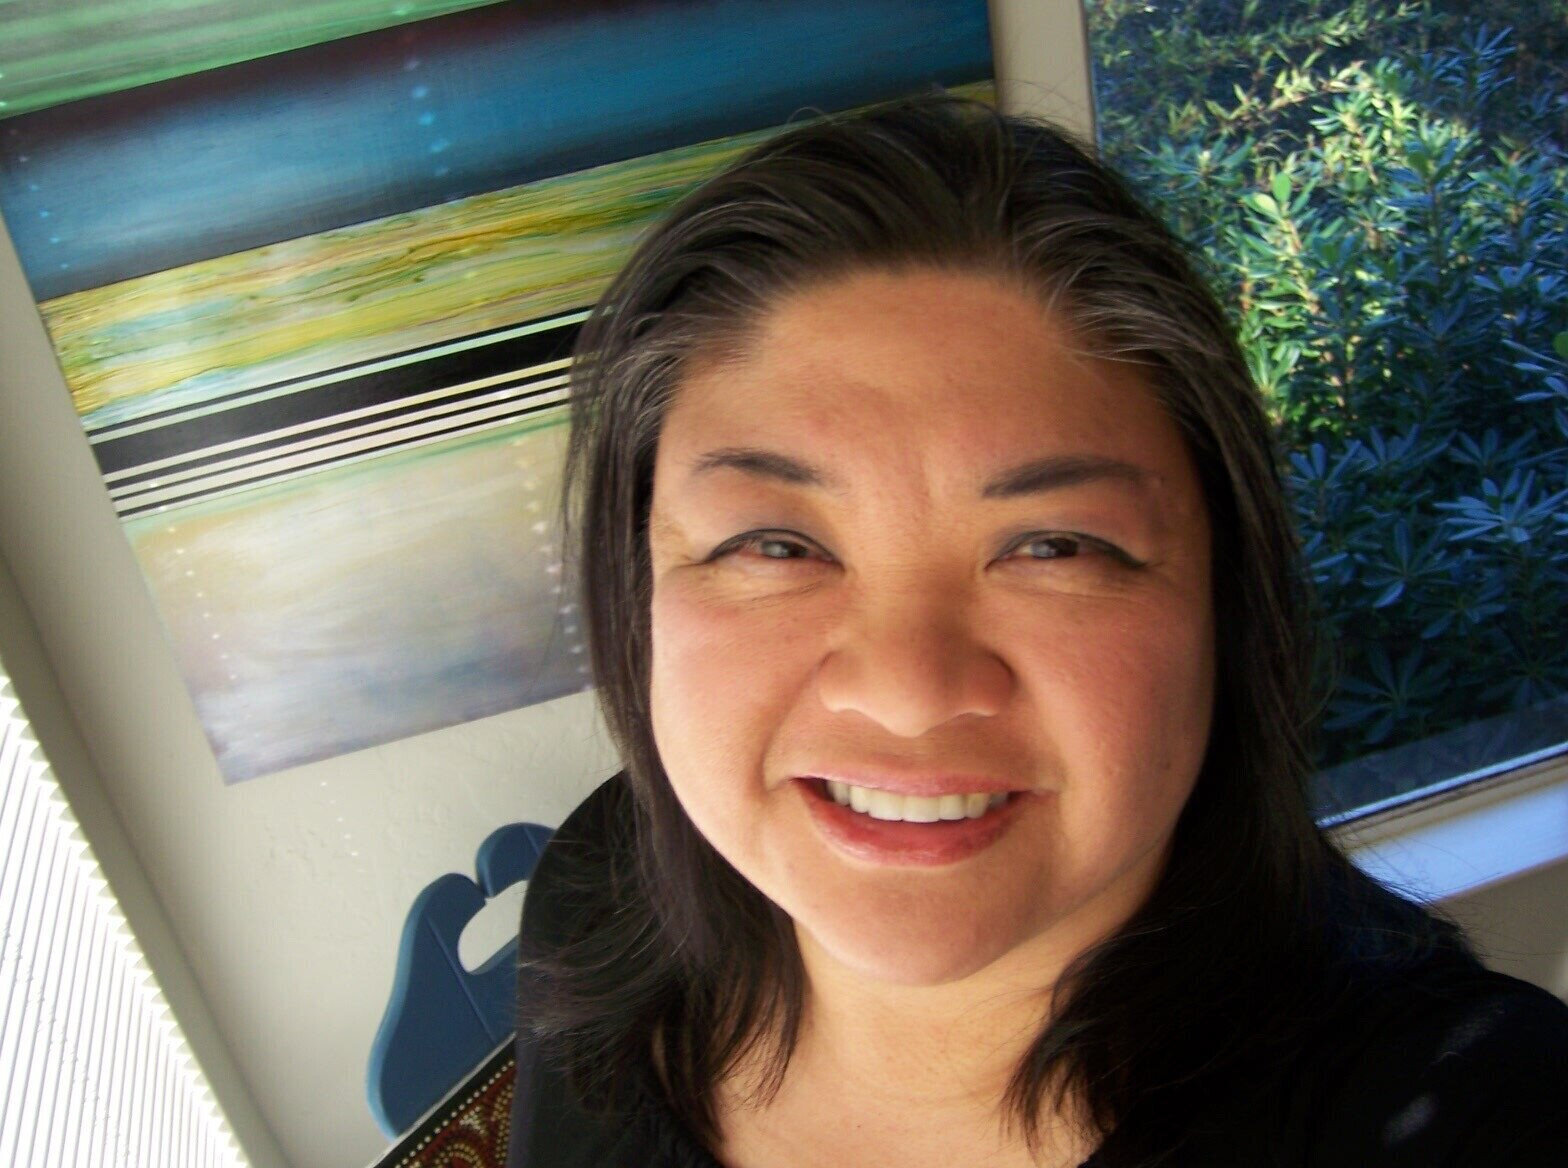  [Image Description: Claire Aguilar is pictured from the shoulders up She stands in front of a screened window and a multicolored abstract painting. She smiles.]  